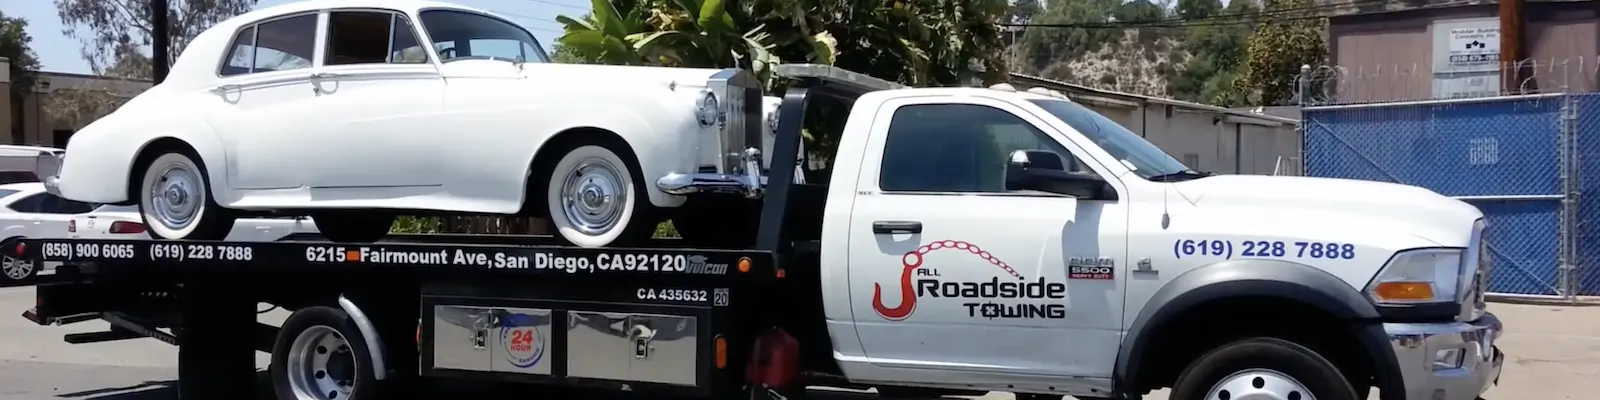 Tow Truck La Jolla is ready to tow your broken beater or your classic car.